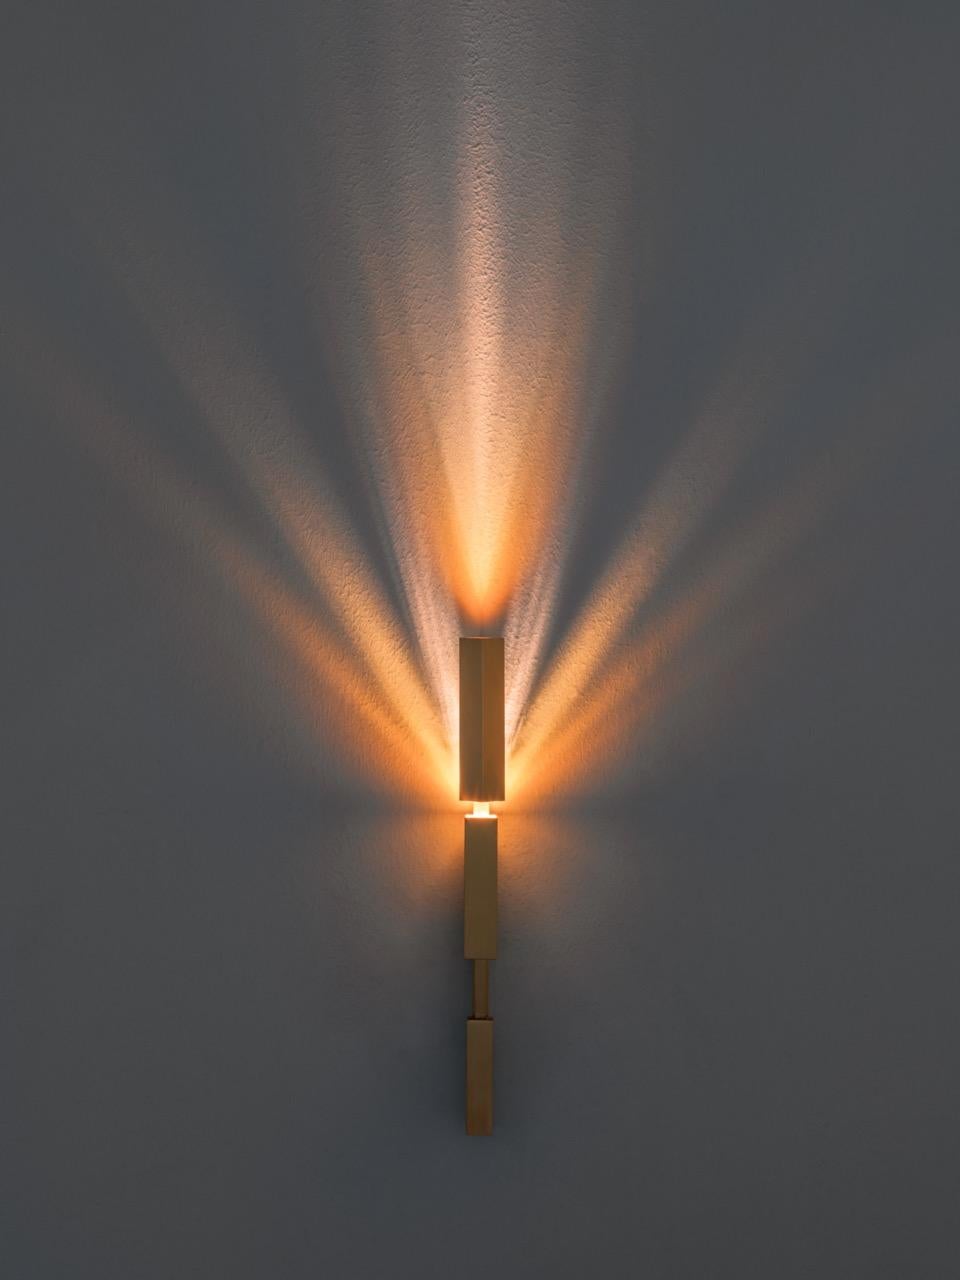 Tetra is a brass wall sconce that scatters light into multiple rays with varying colour temperatures. The lamp is interactive and can be manually adjusted to modify the intensity and projection pattern: A reimagined dimming effect.

The wall lamp